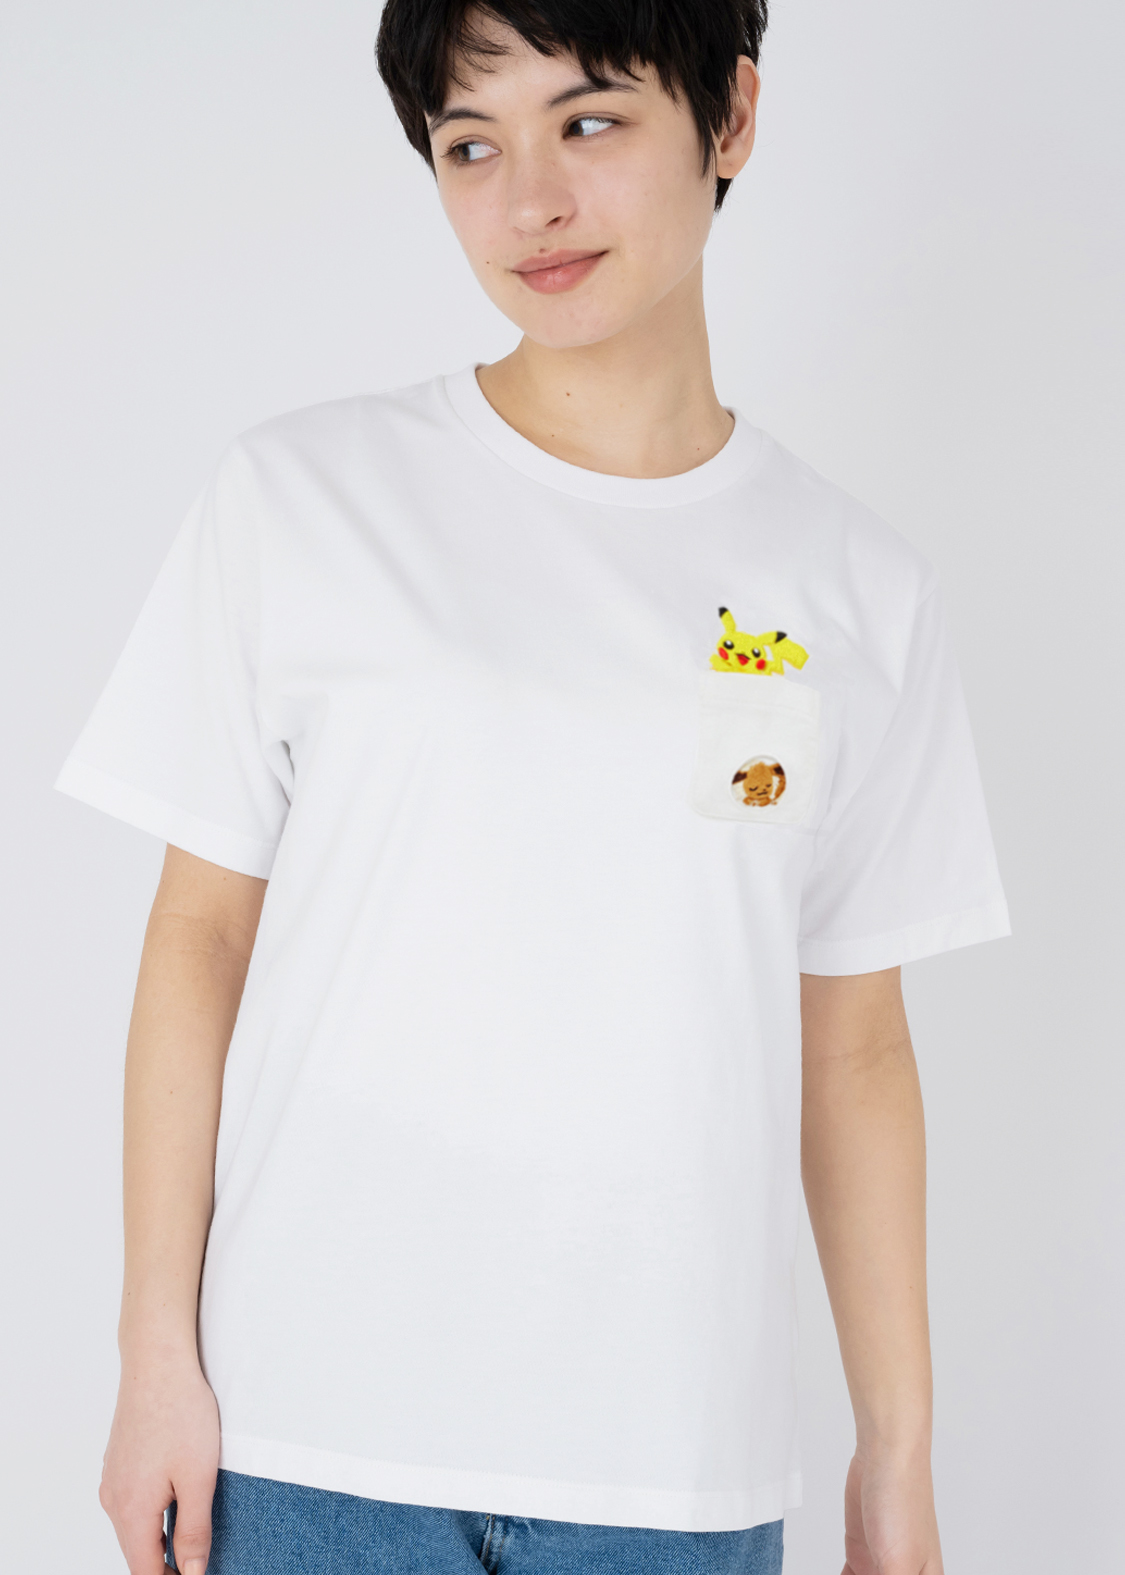 22 new kinds of Pokémon apparel coming soon from popular T-shirt brand ...